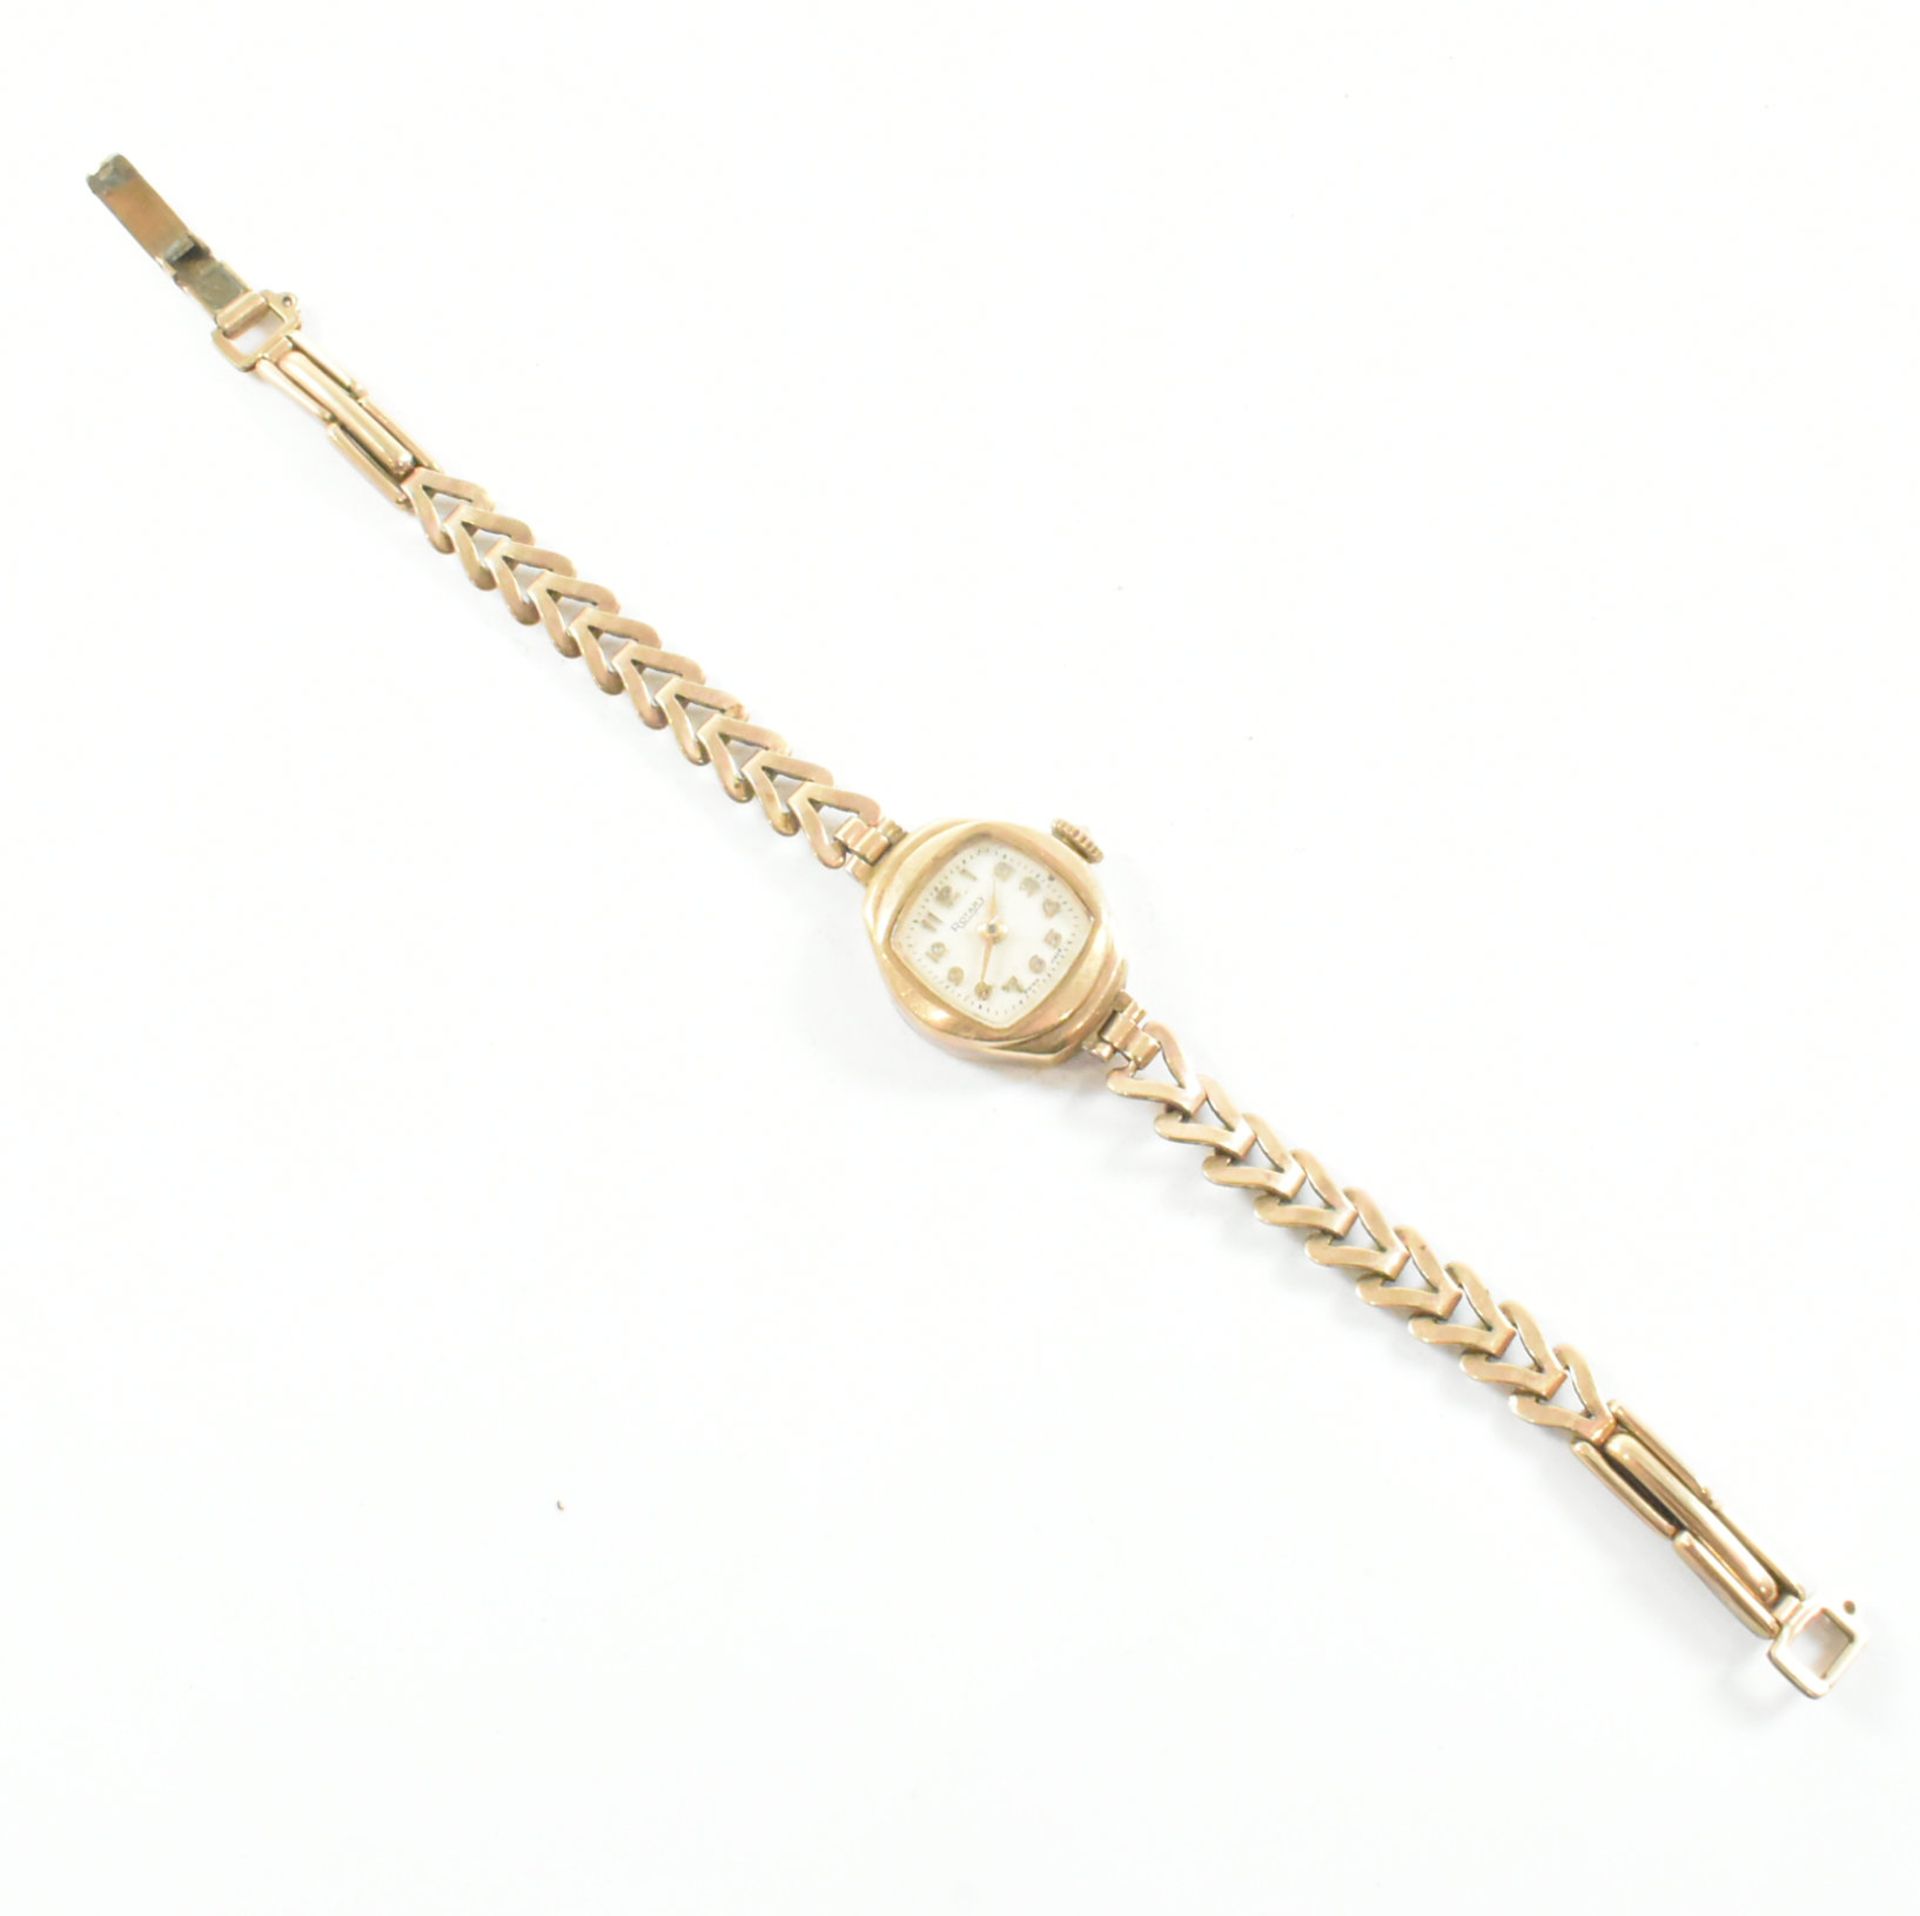 1960S HALLMARKED 9CT GOLD ROTARY WATCH WITH METAL LINED STRAP - Image 4 of 11